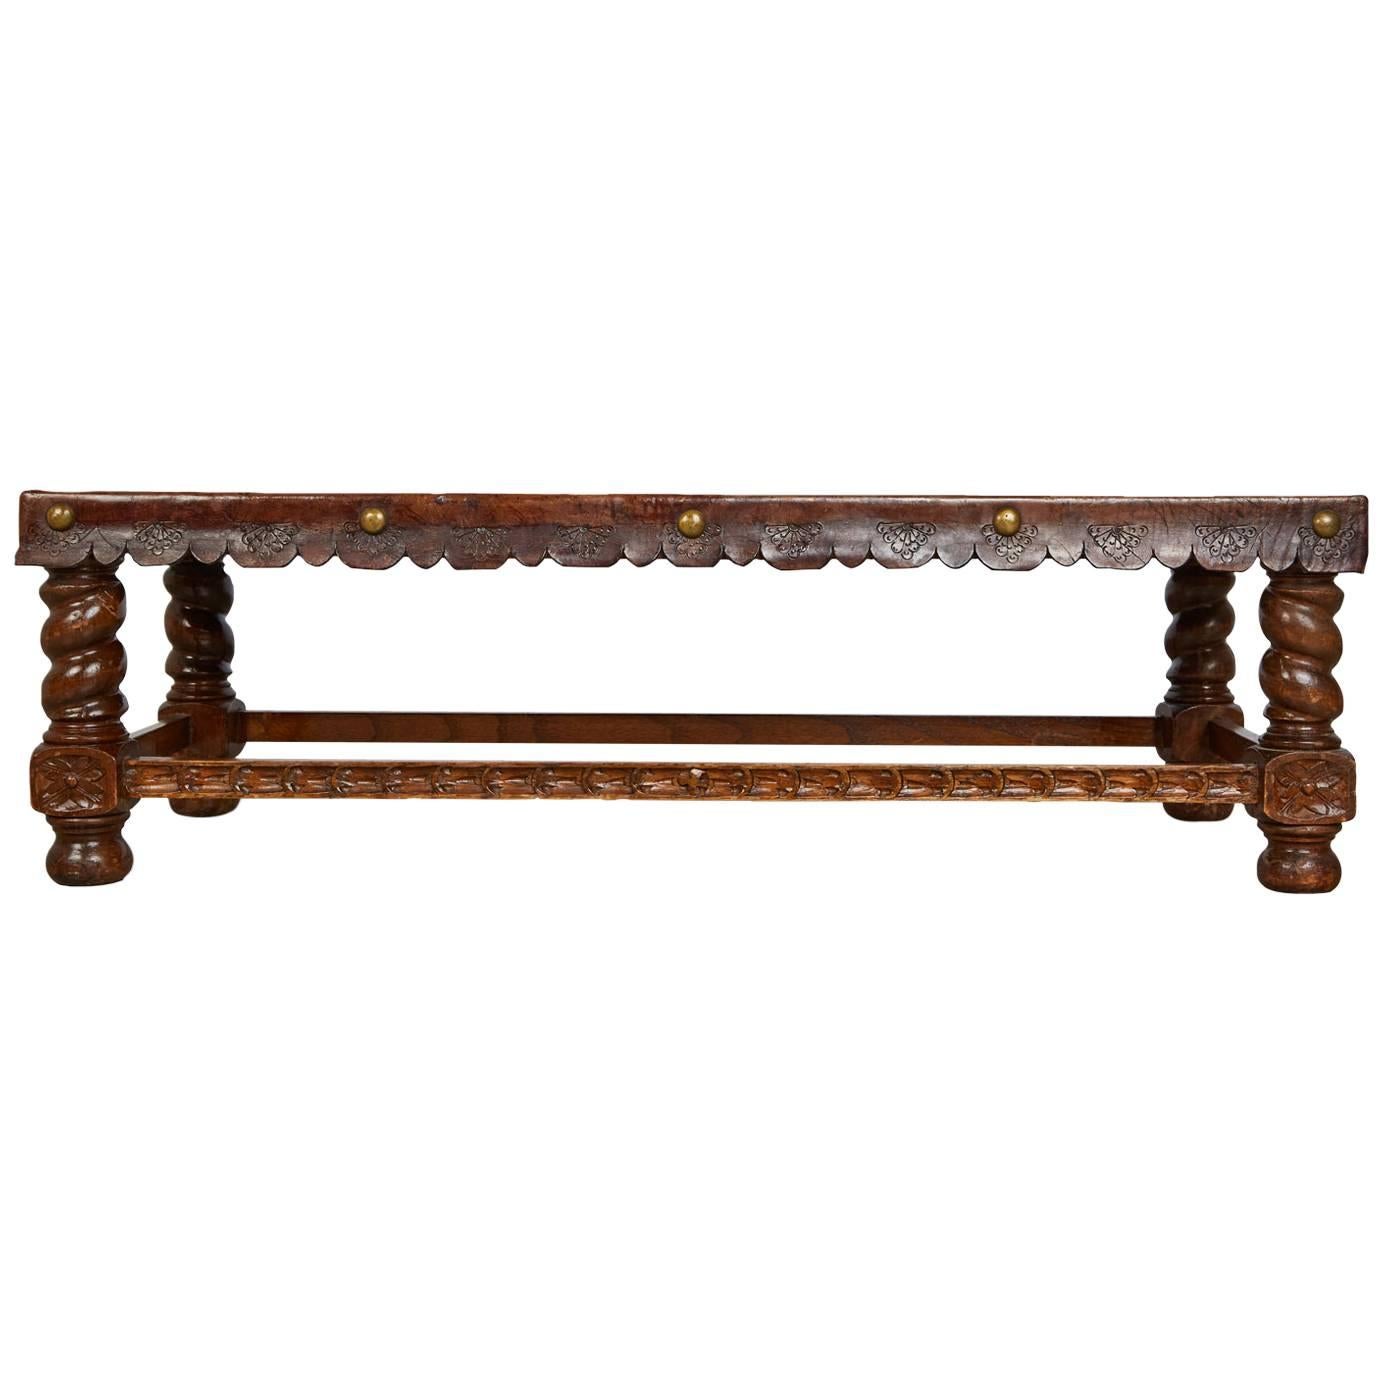 Spanish Baroque Tooled Leather Bench or Coffee Table, Colonial Missionary Scene